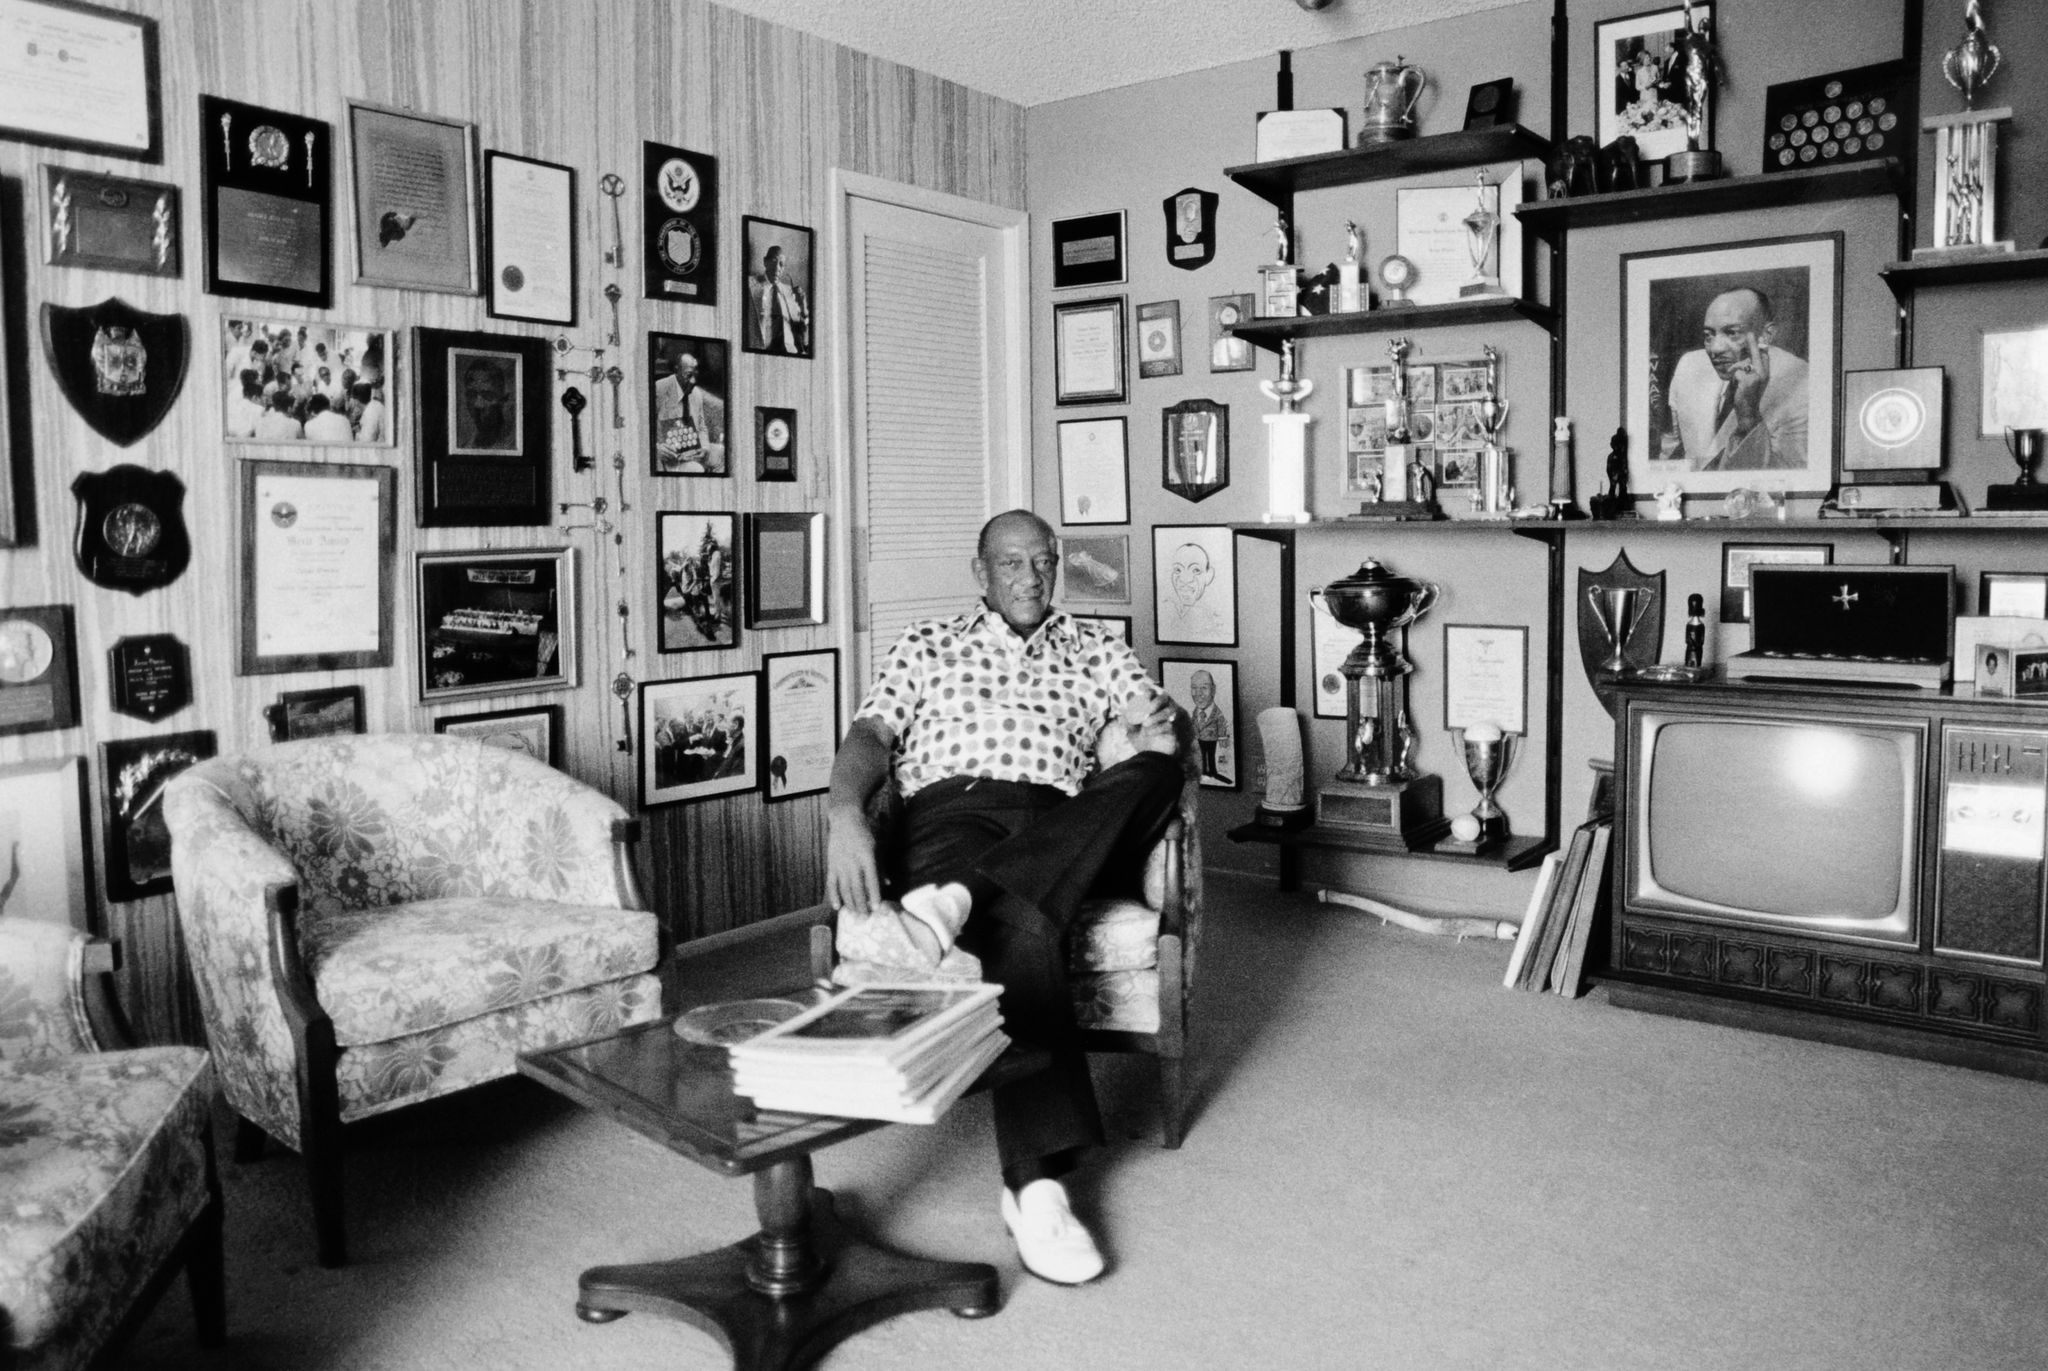 quadruple gold medallist at the 1936 olympic games in berlin, jesse owens of the usa, surrounded by mementoes of his athletics career at his home in phoenix, arizona, circa 1975 photo by bob thomas sports photography via getty images